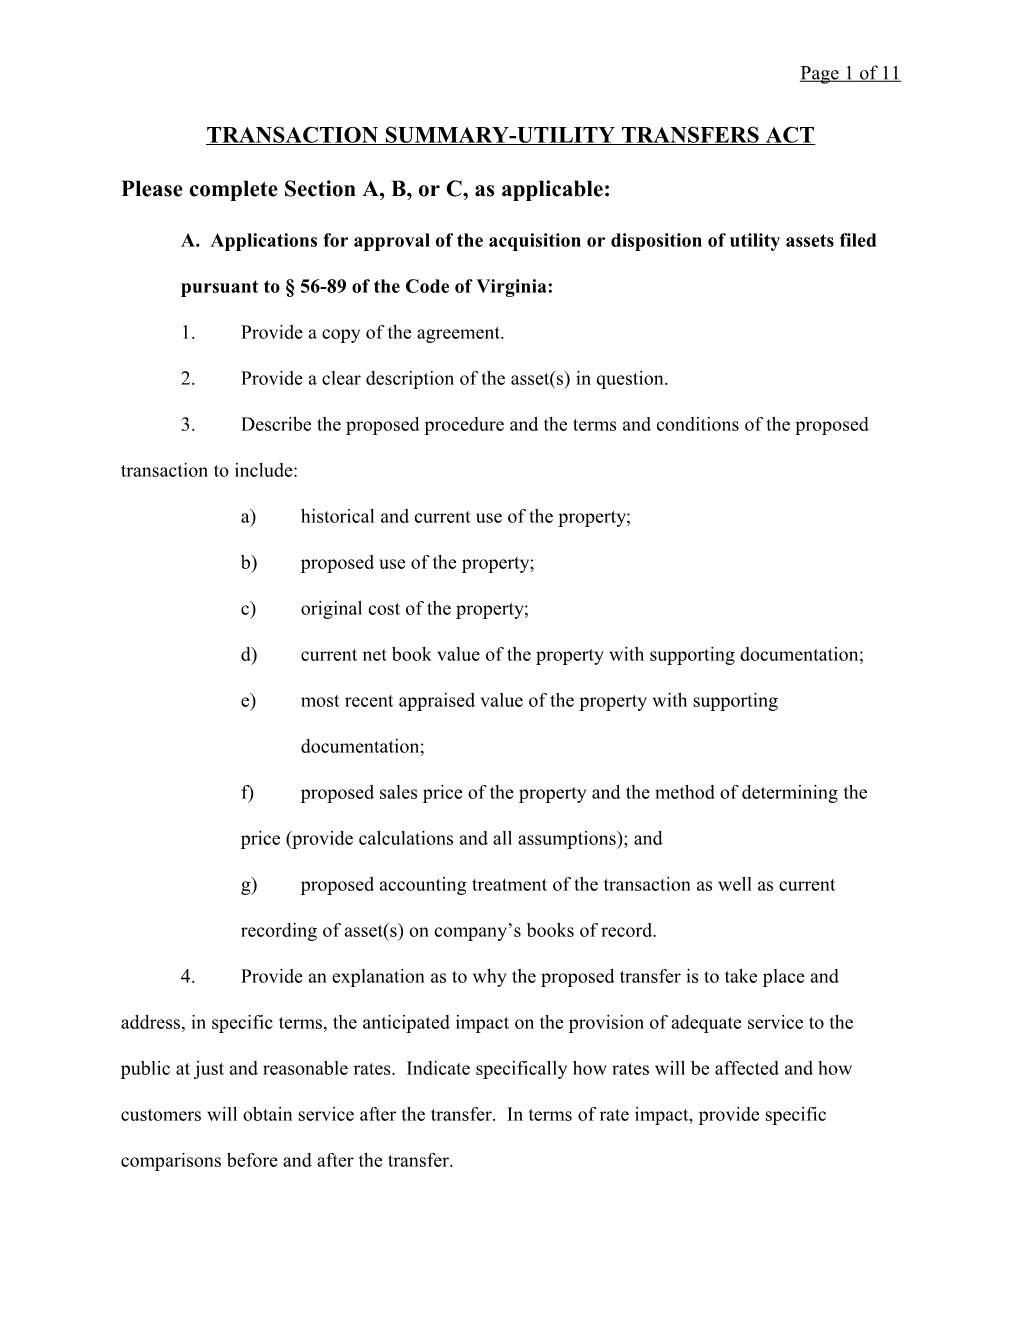 Applications Filed Pursuant to Chapter 4 of Title 56 of the Code of Virginia (Affiliates Act)